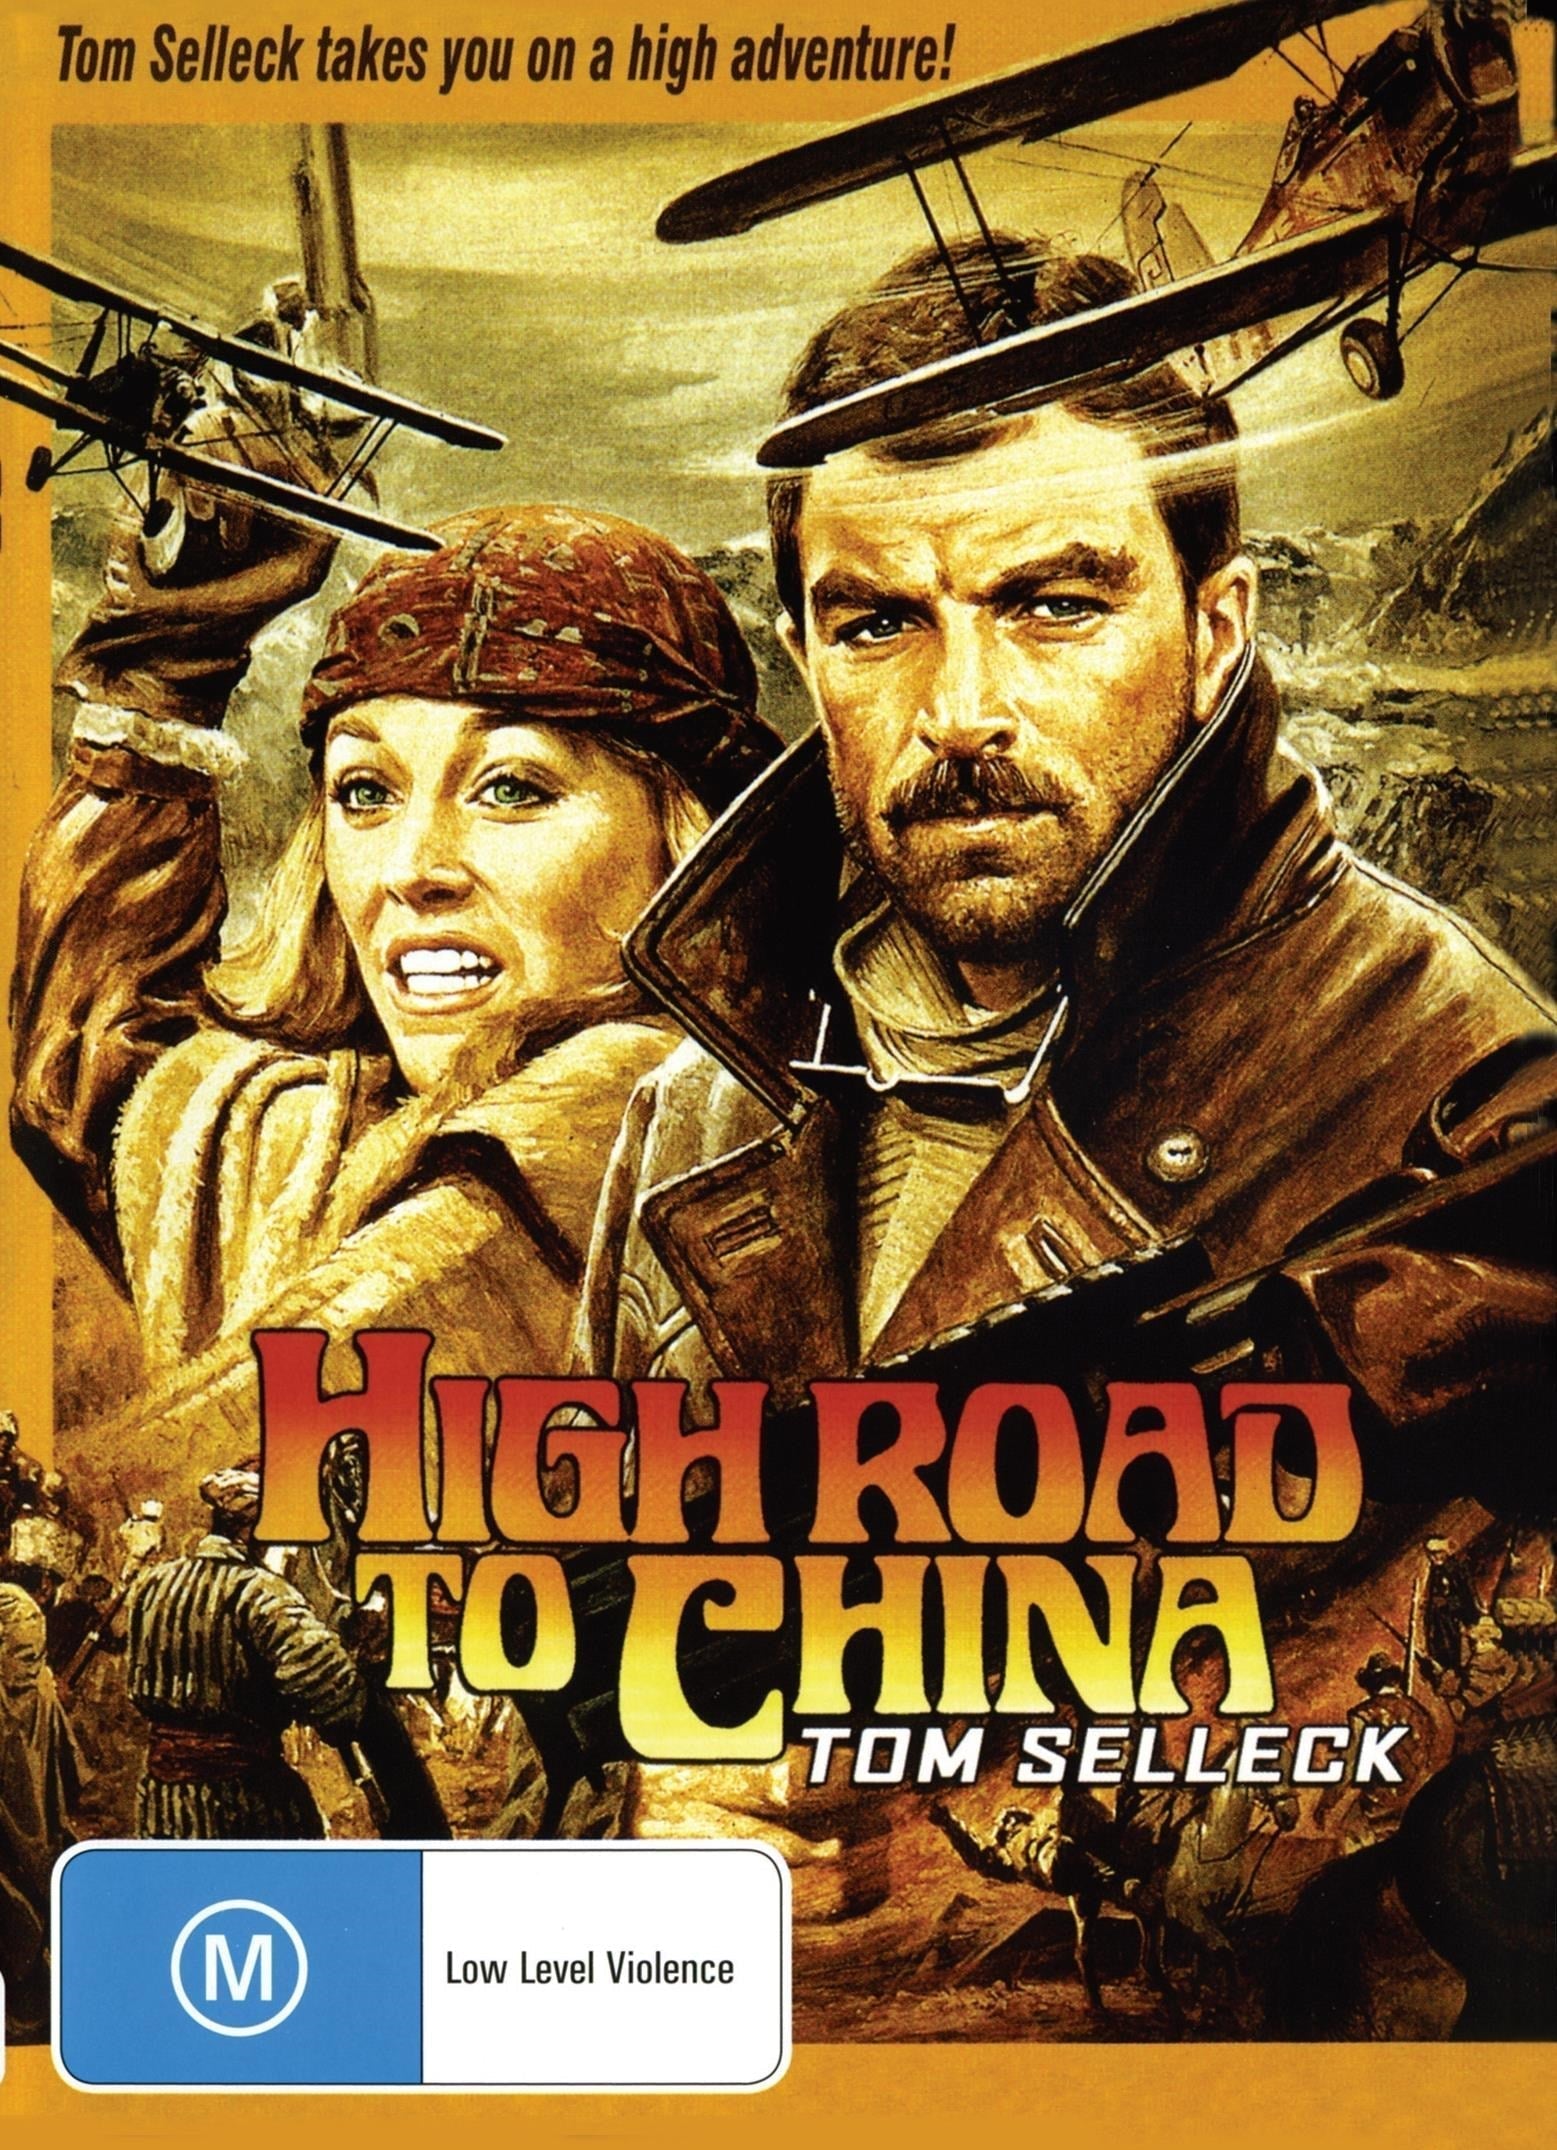 High Road To China rareandcollectibledvds